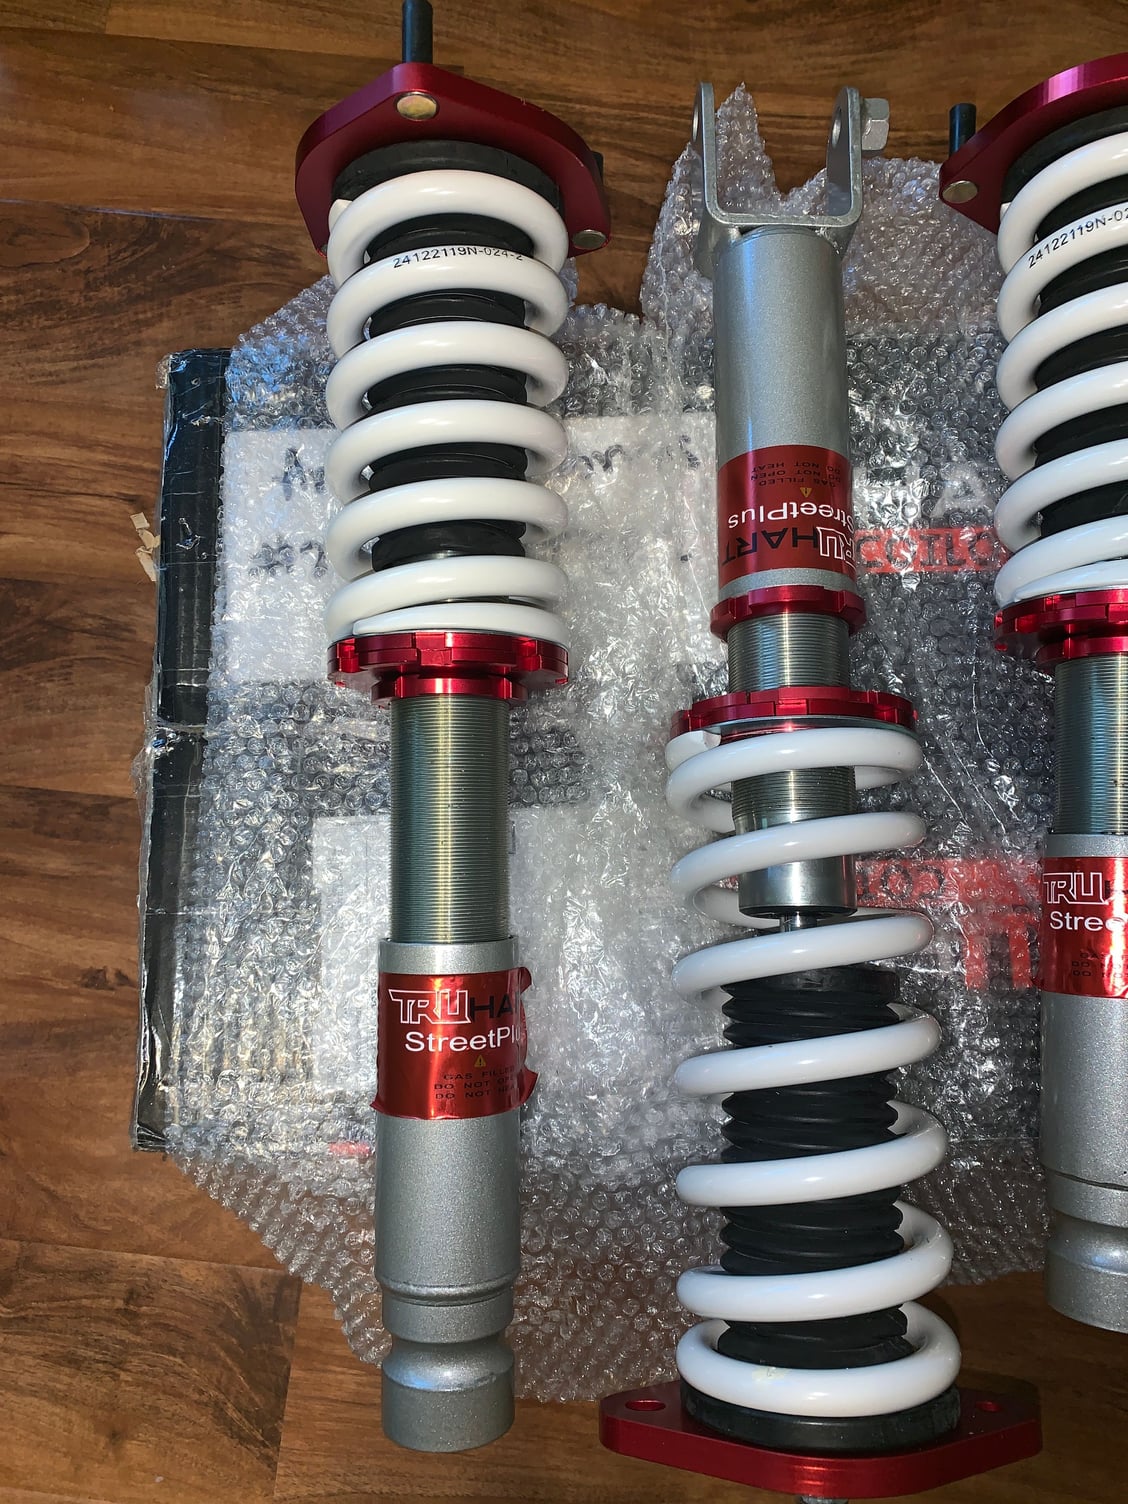 g37 coilover install